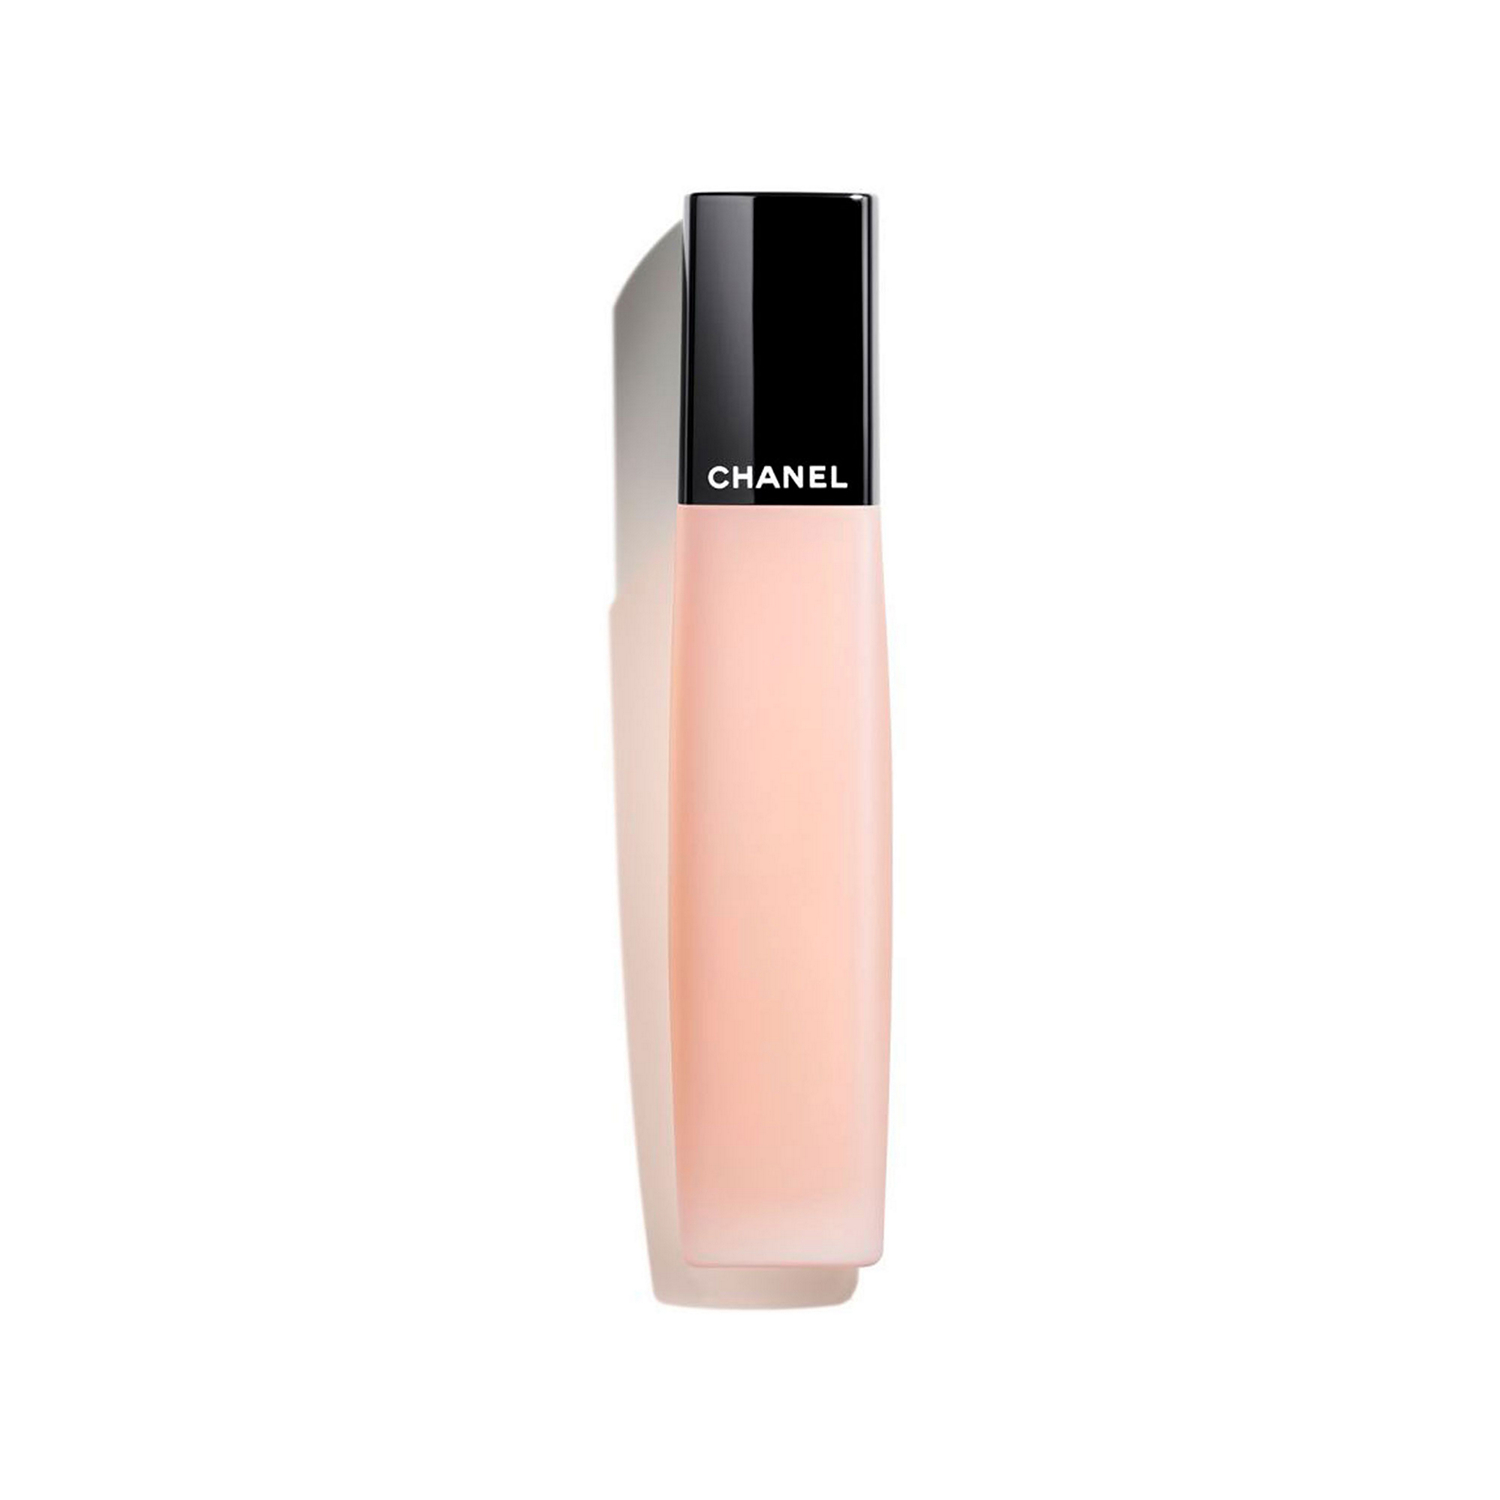 CHANEL L'HUILE CAMÉLIA HYDRATING & FORTIFYING OIL